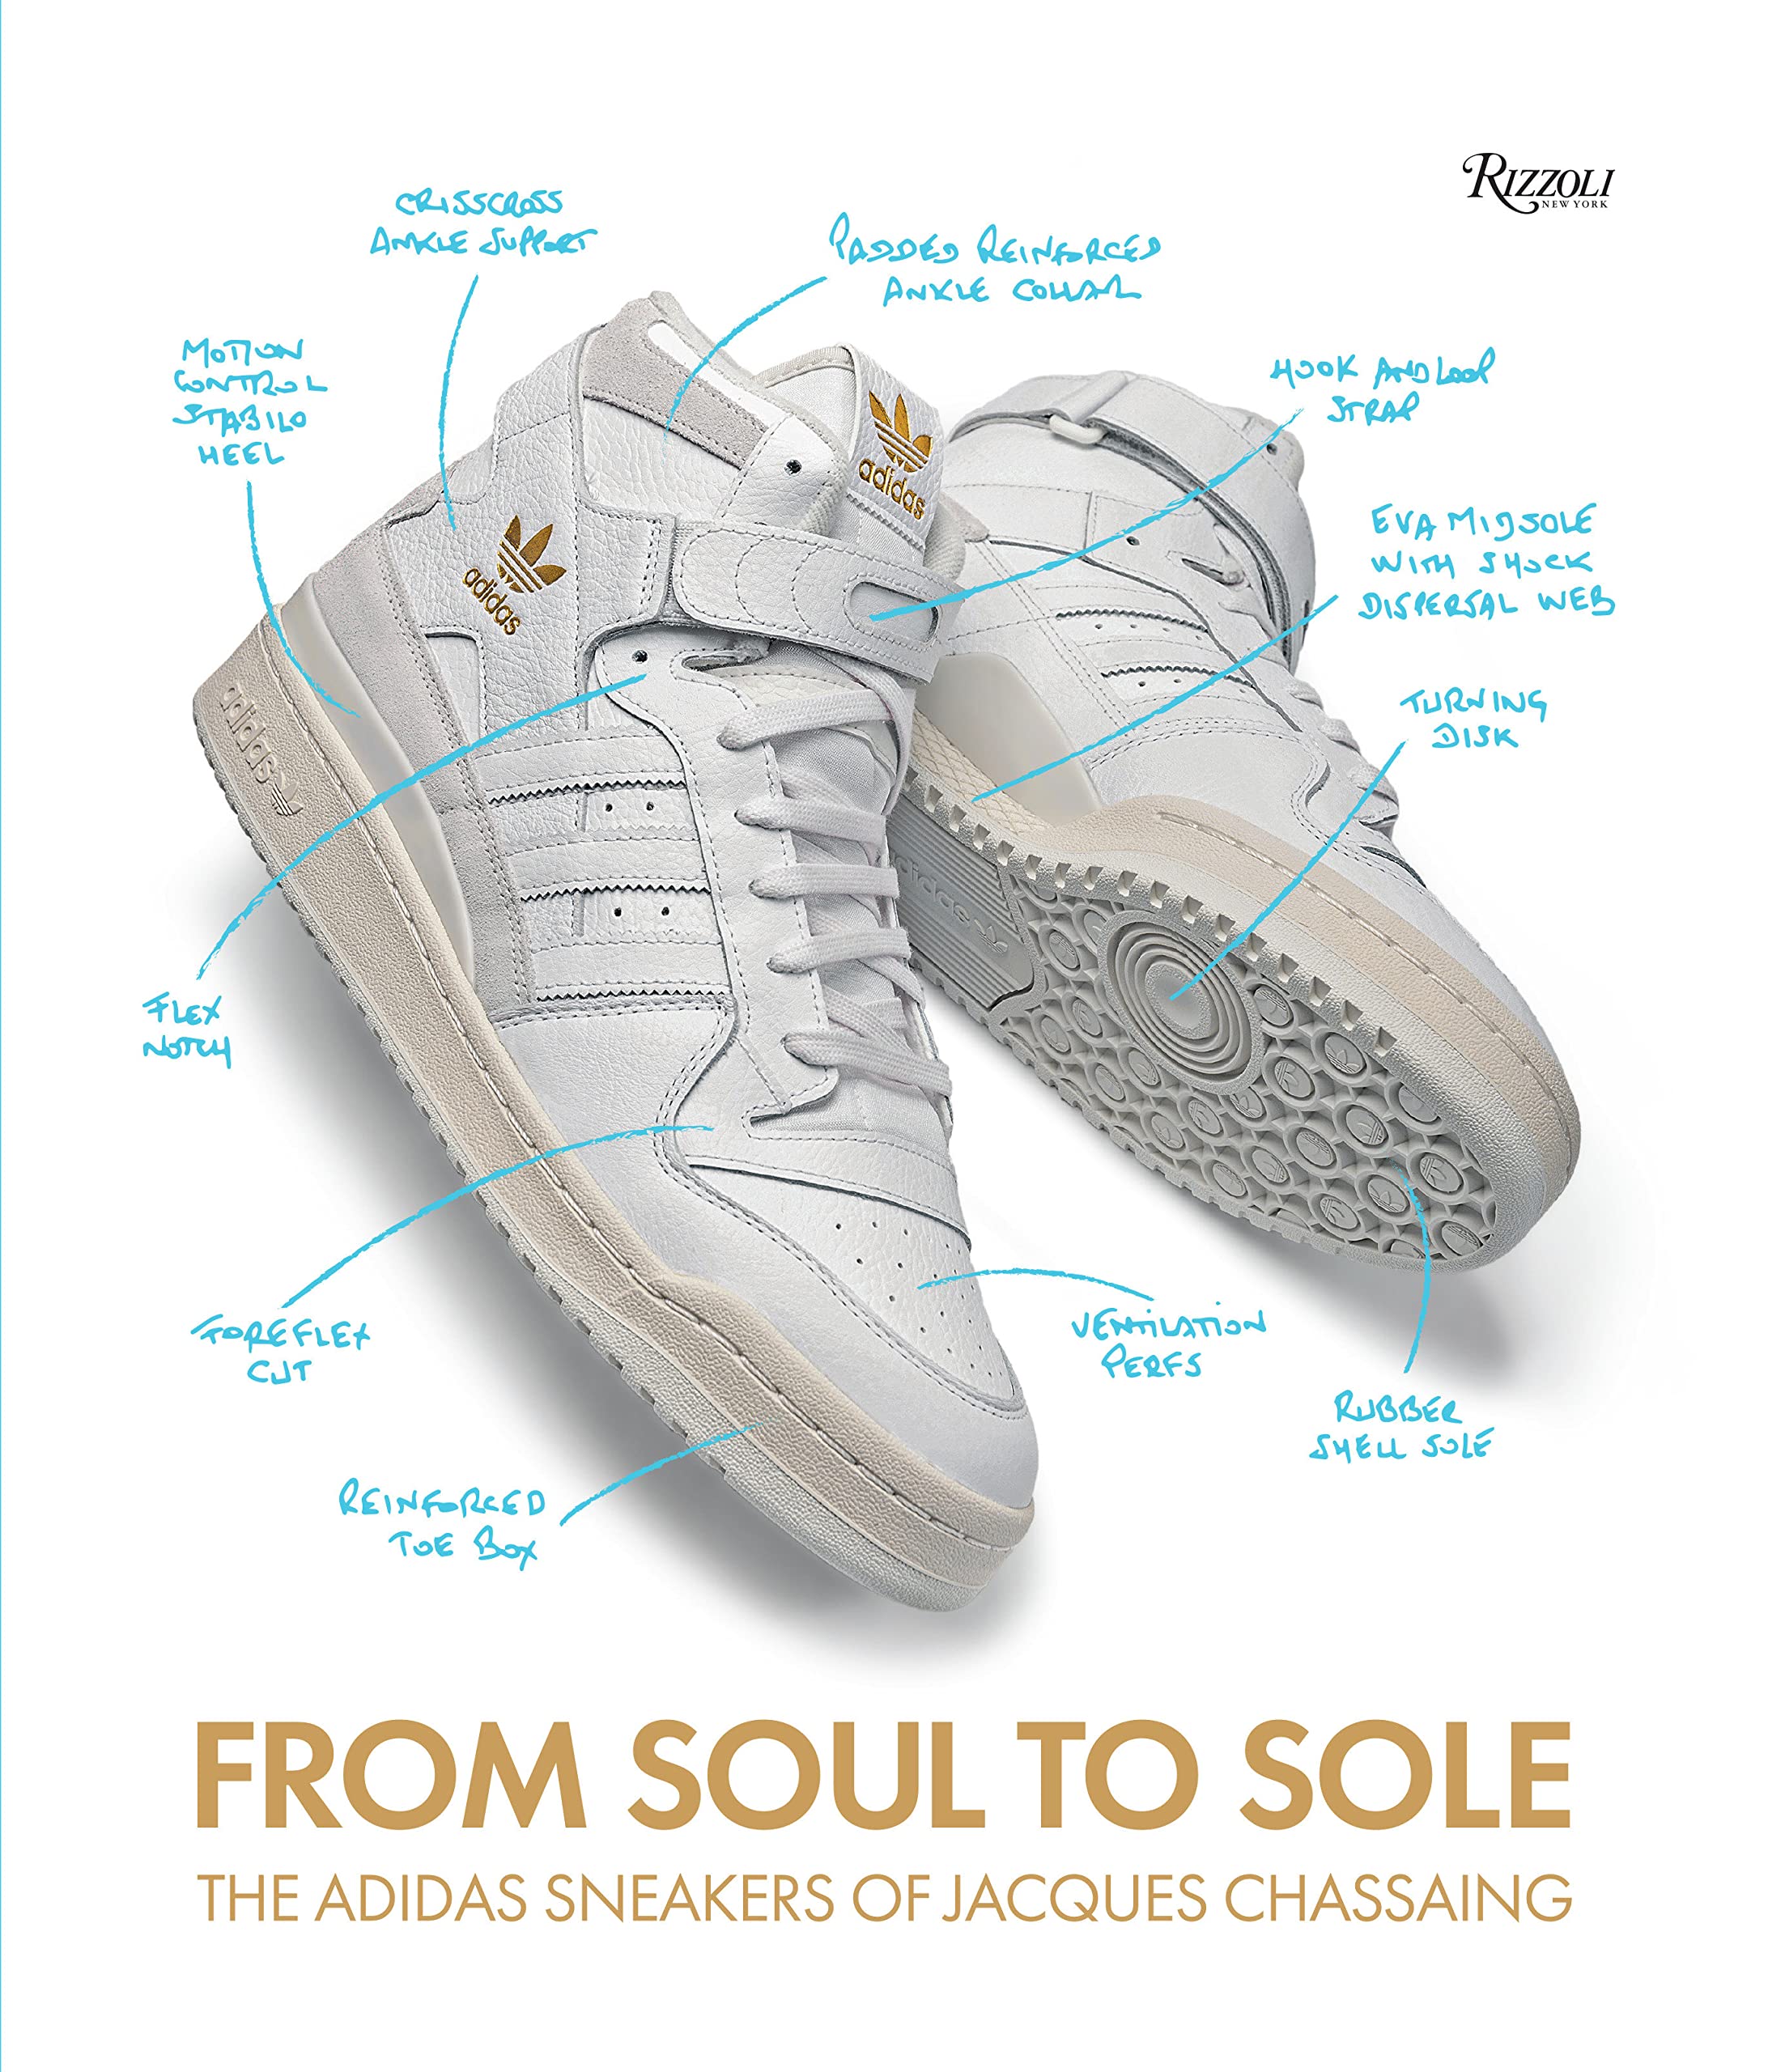 adidas 0020 92v From Soul to Sole: The Adidas Sneakers of Jacques Chassaing